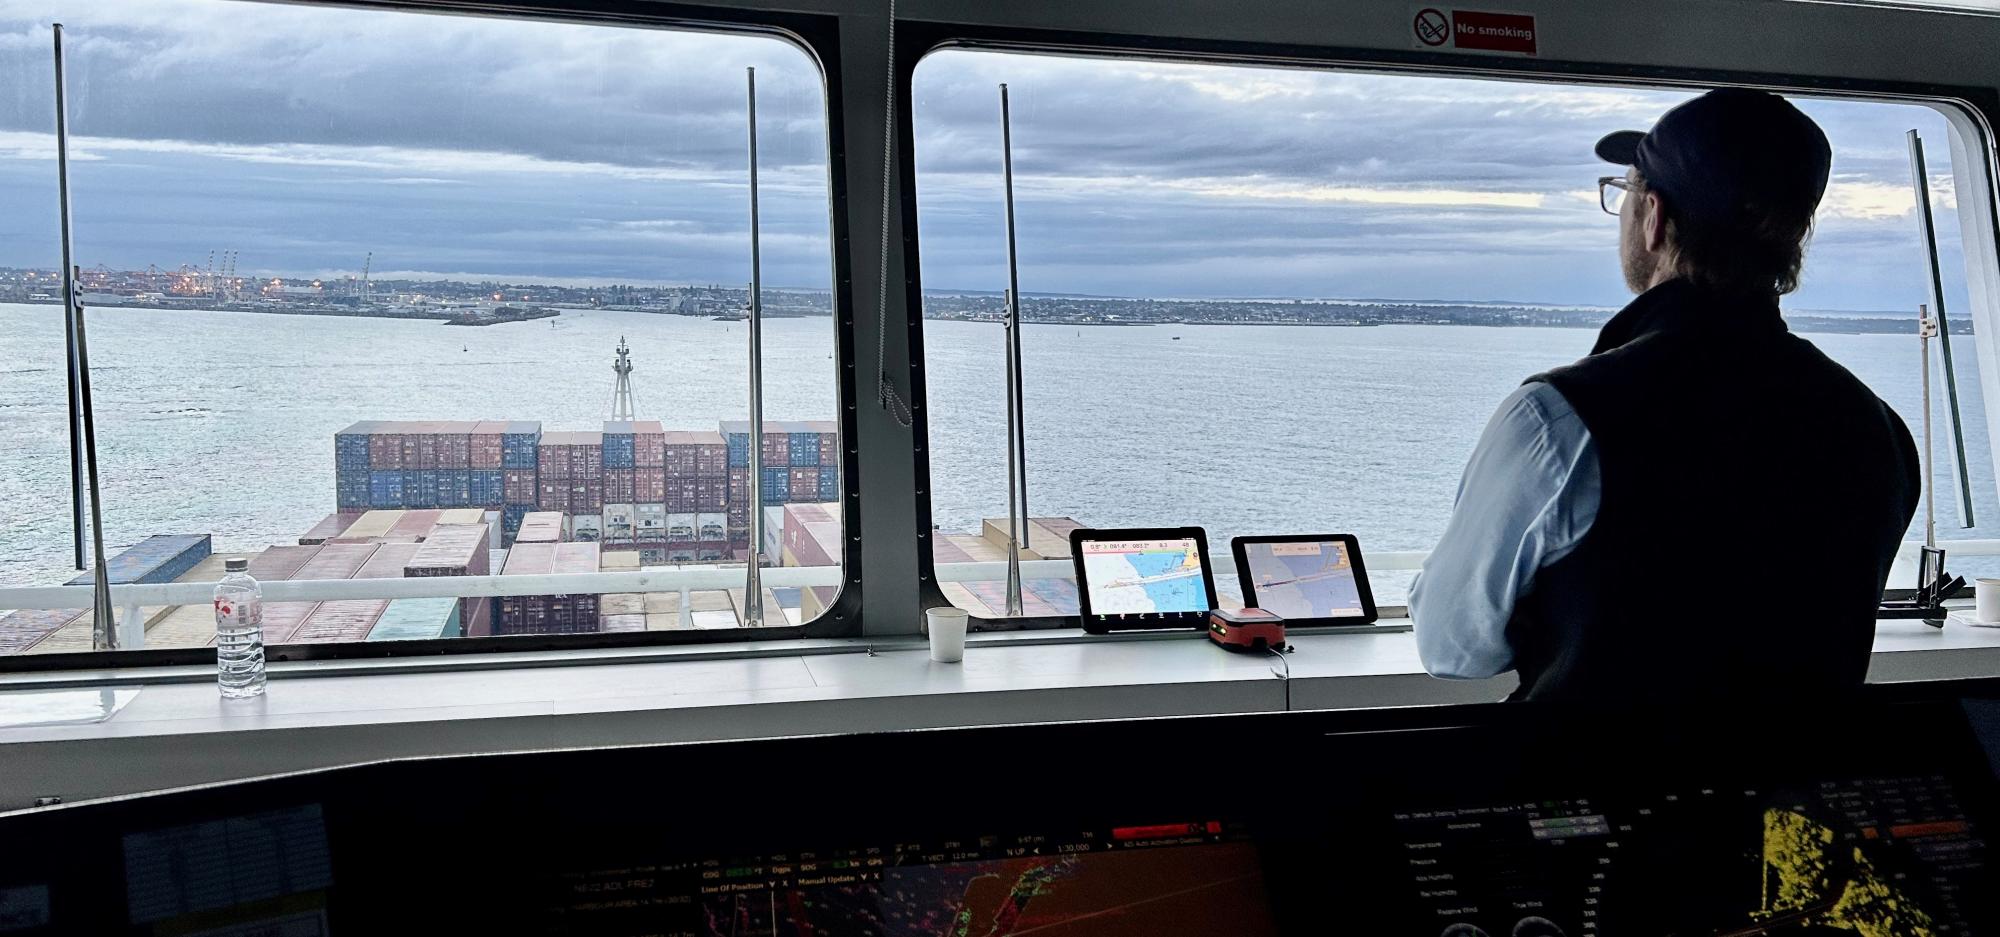 an adult person in slight silhouette stands inside a ship indoor viewing deck with controls. They look out through the large window onto a harbour with sea containers